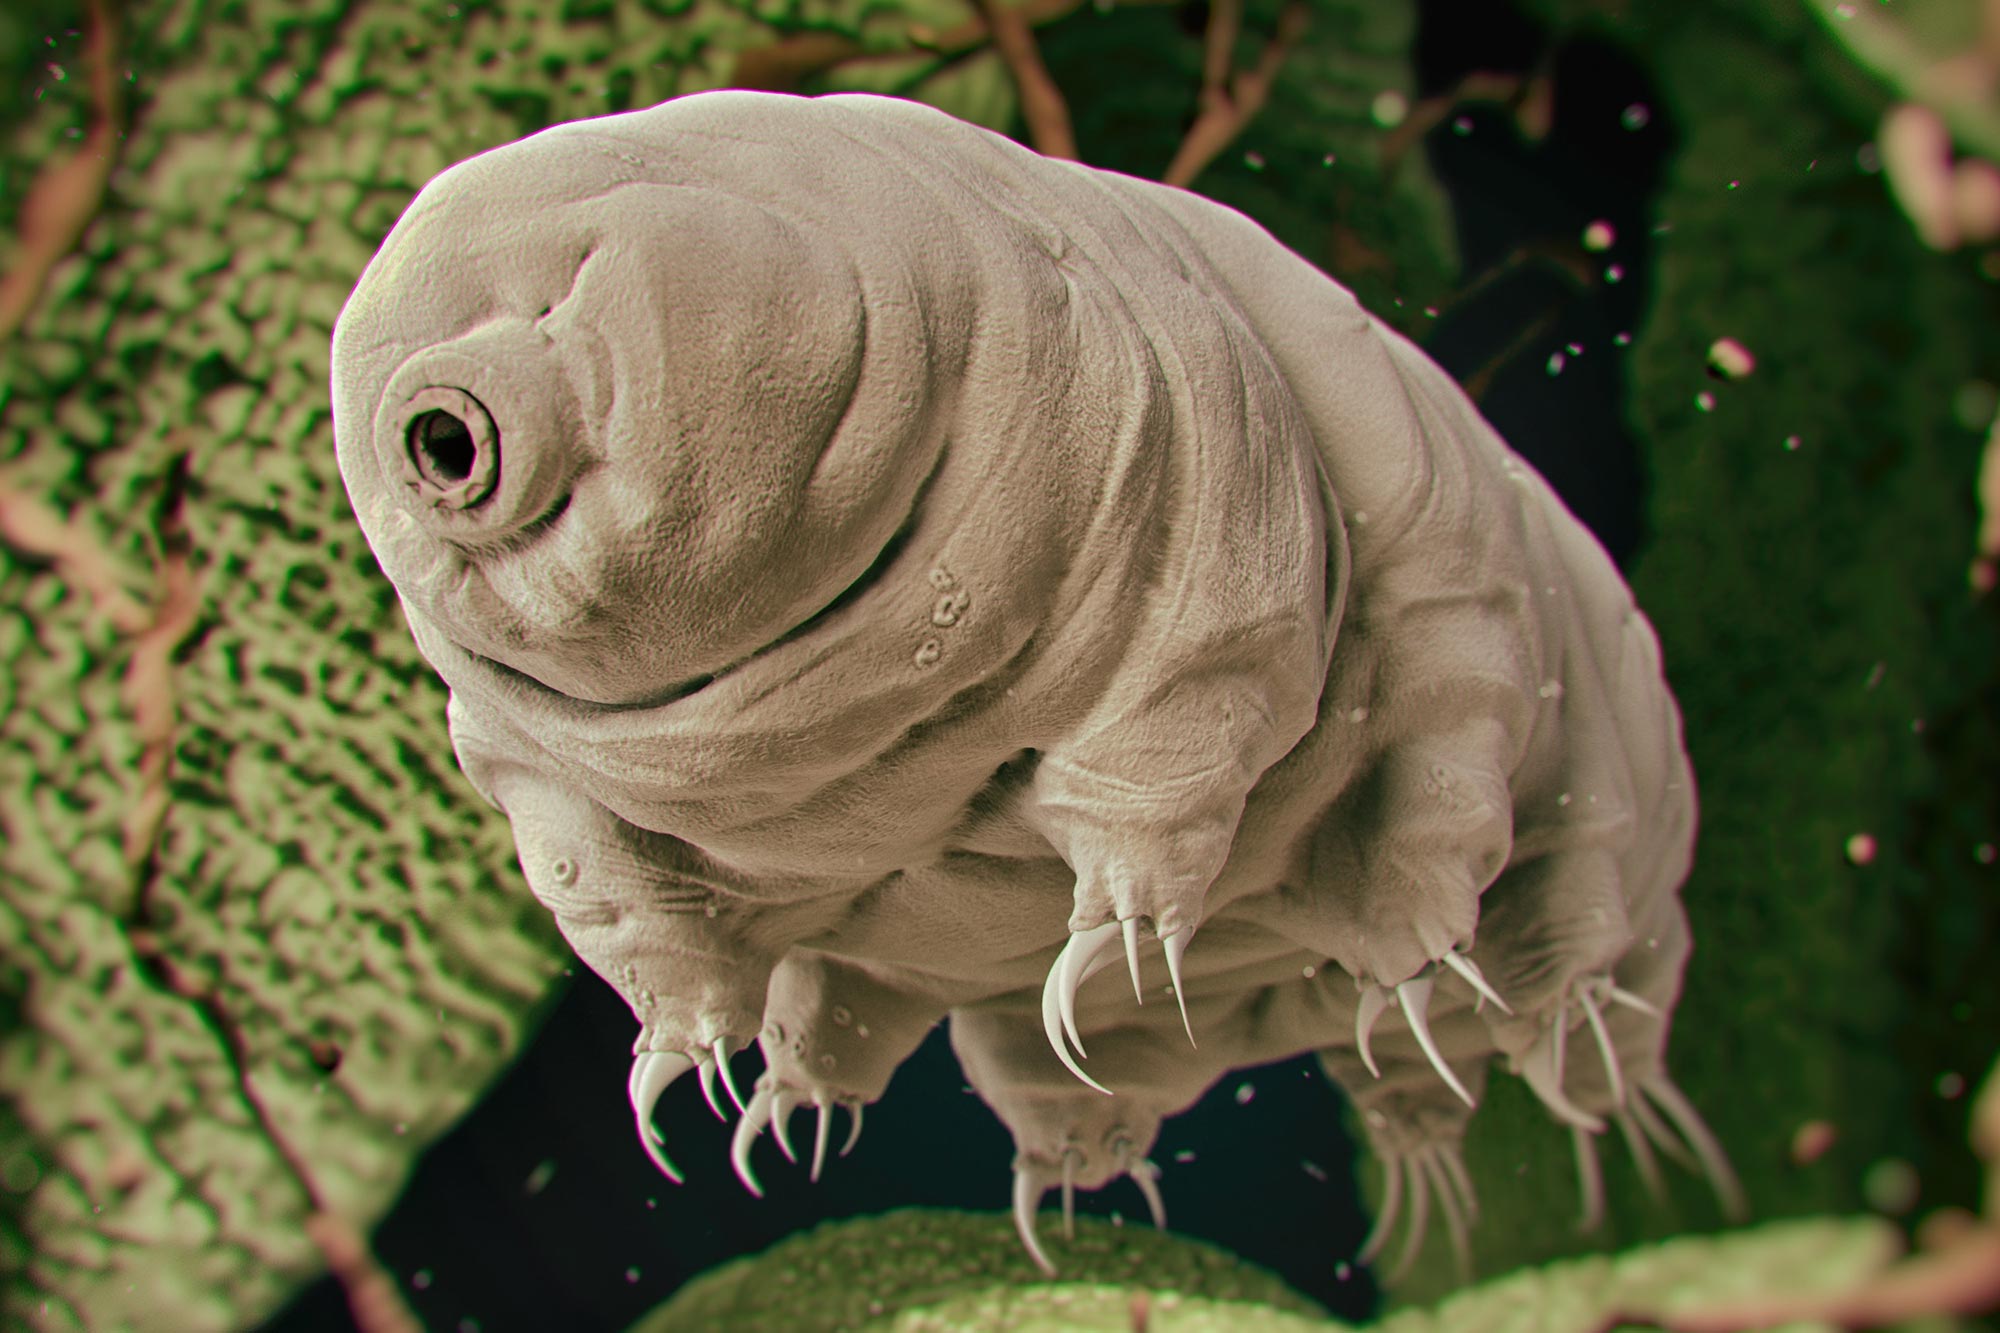 What Makes This Creature Nearly Invincible? Biologists Have Gained New  Insight